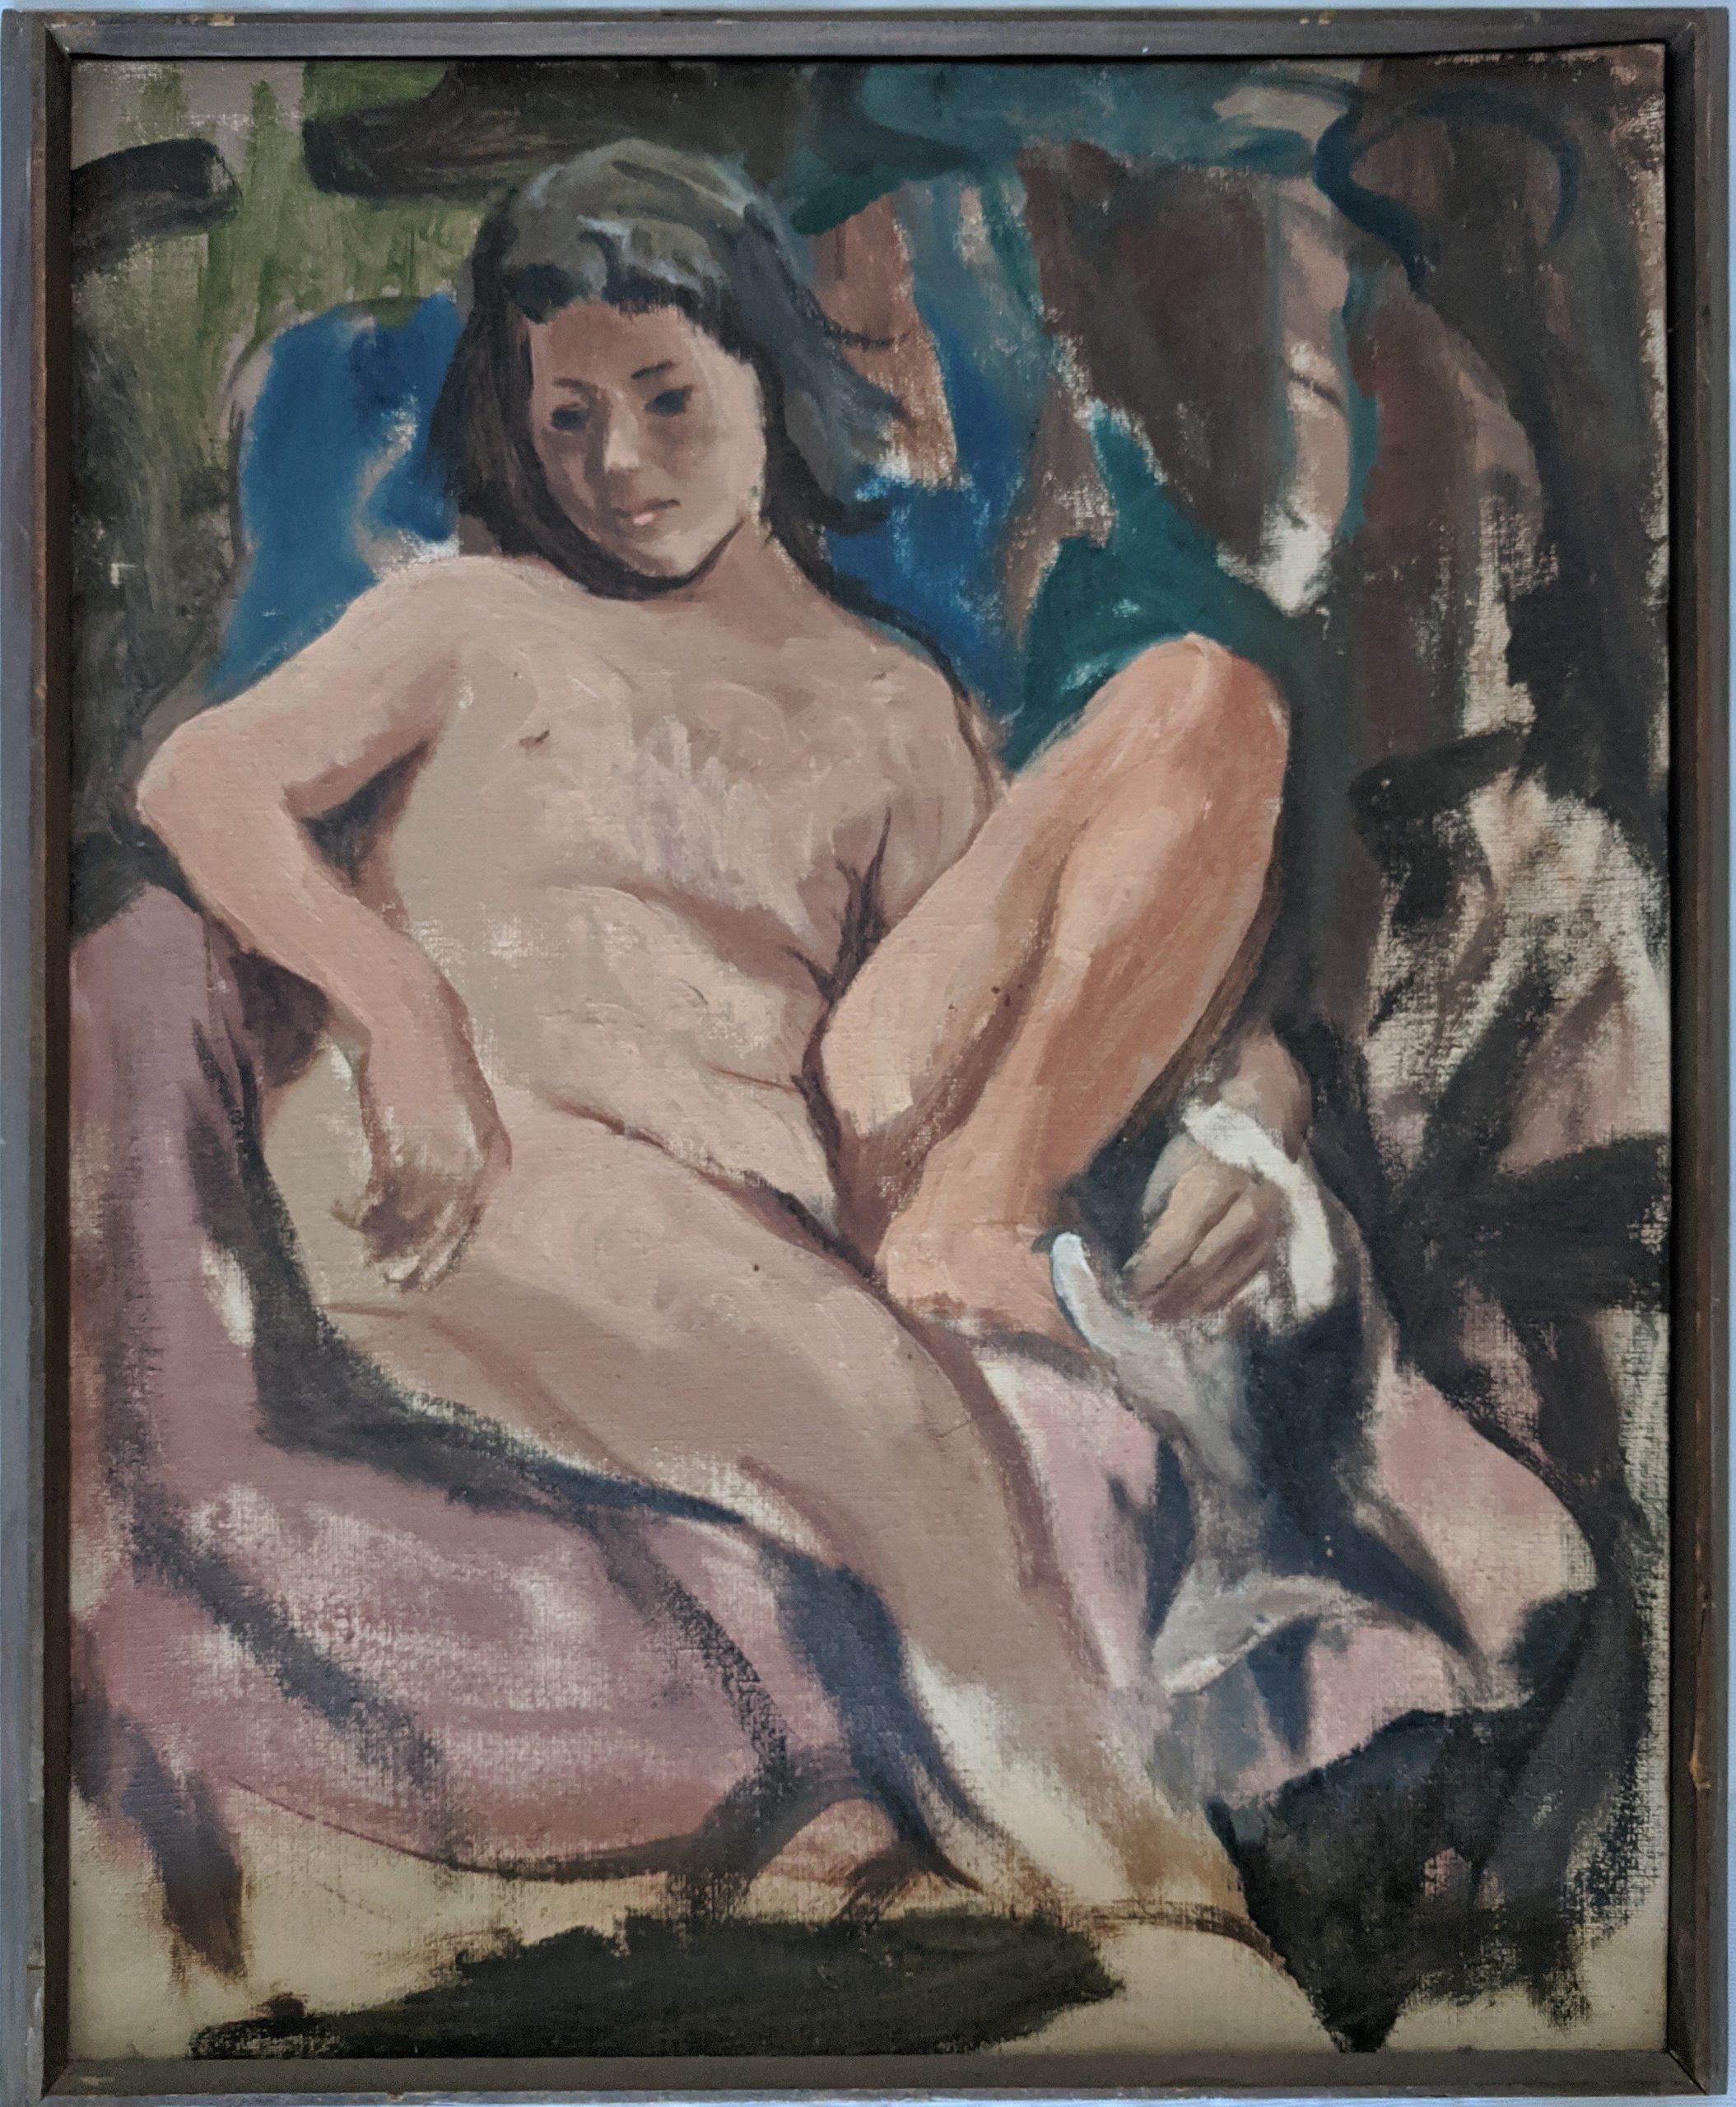 seated nude girl with puppy - Painting by Betty Sutherland aka Boschka Layton